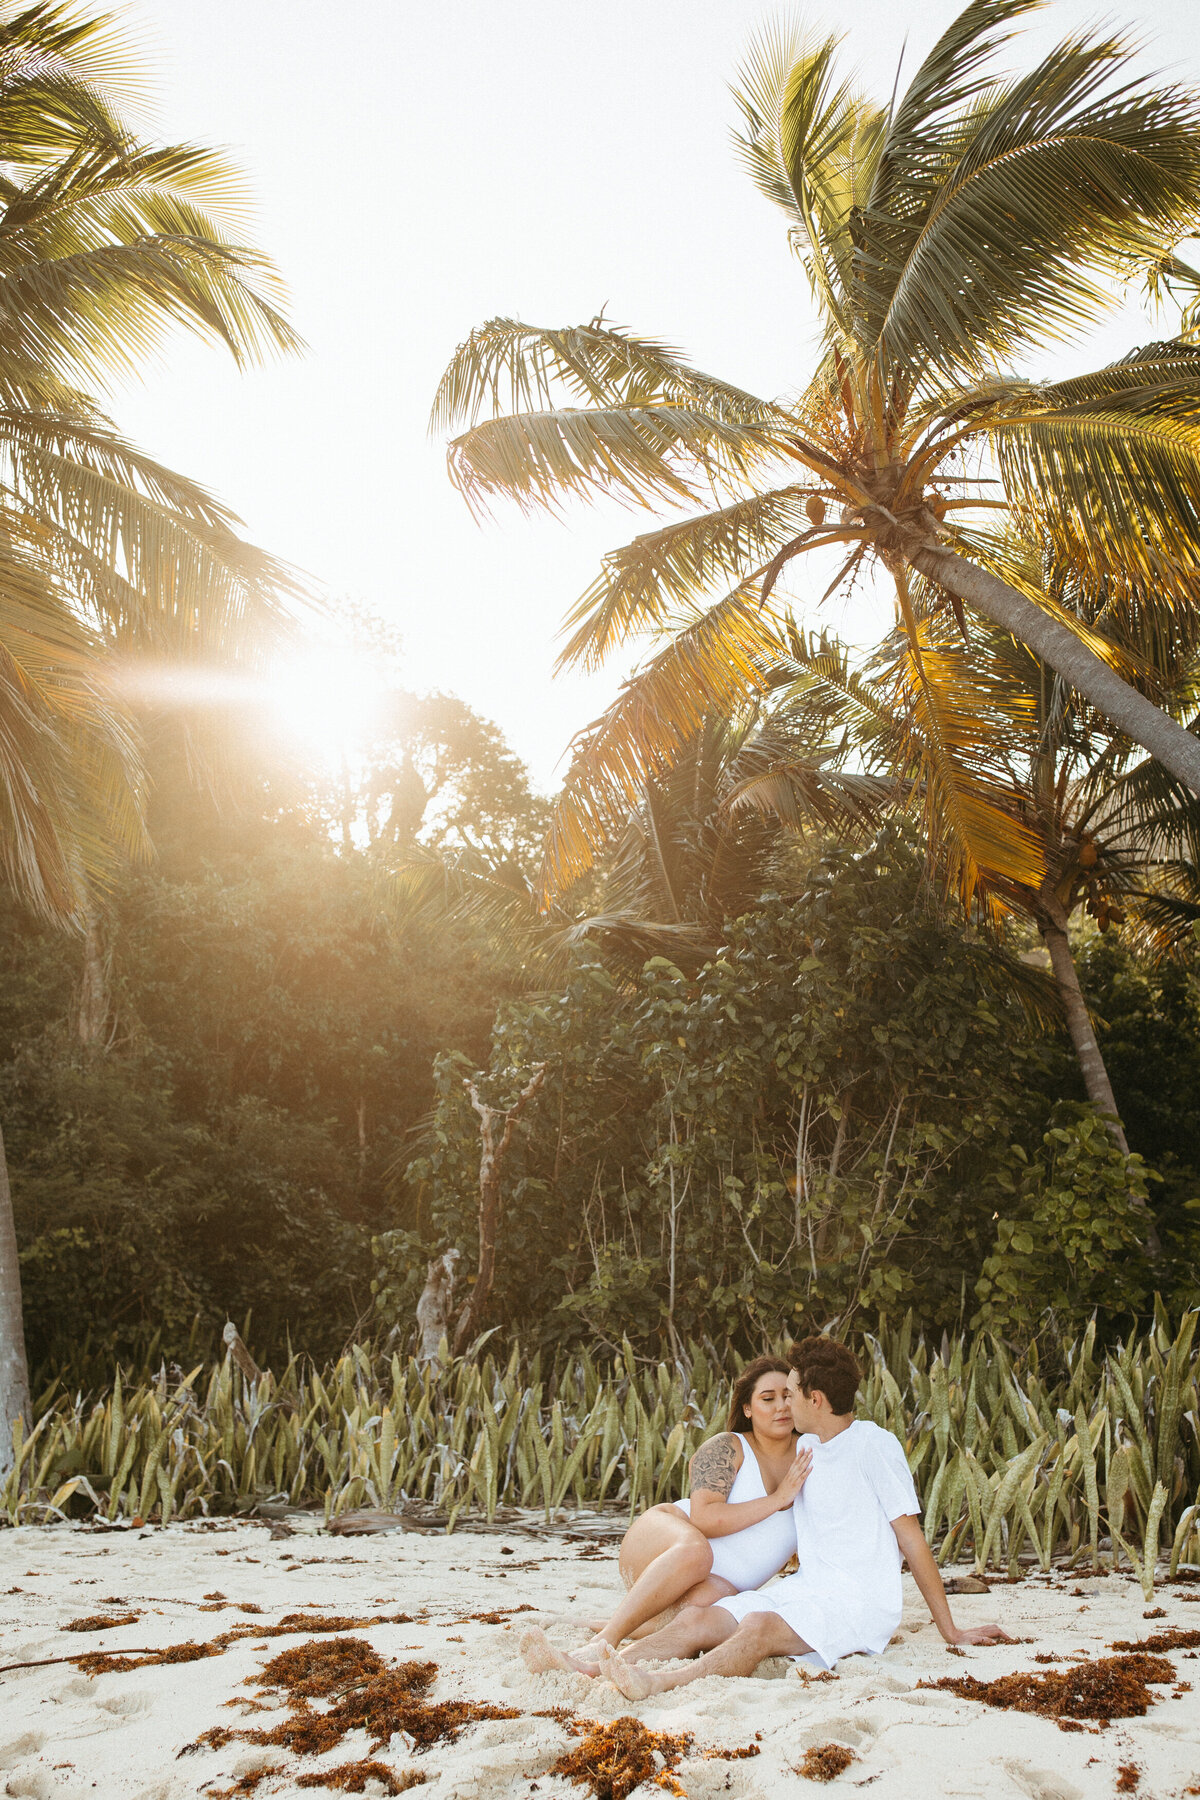 A couple sitting on a sandy beach at sunset, surrounded by tropical foliage and the warm glow of the sun